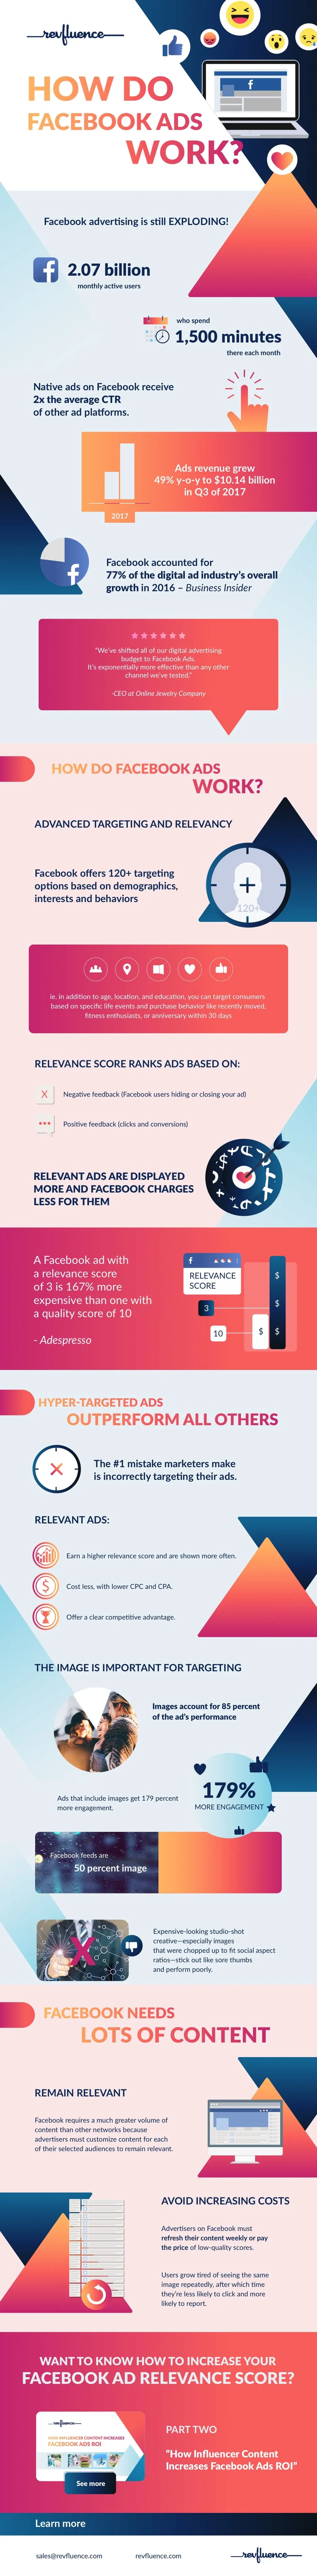 How do Facebook ads work? - #infographic